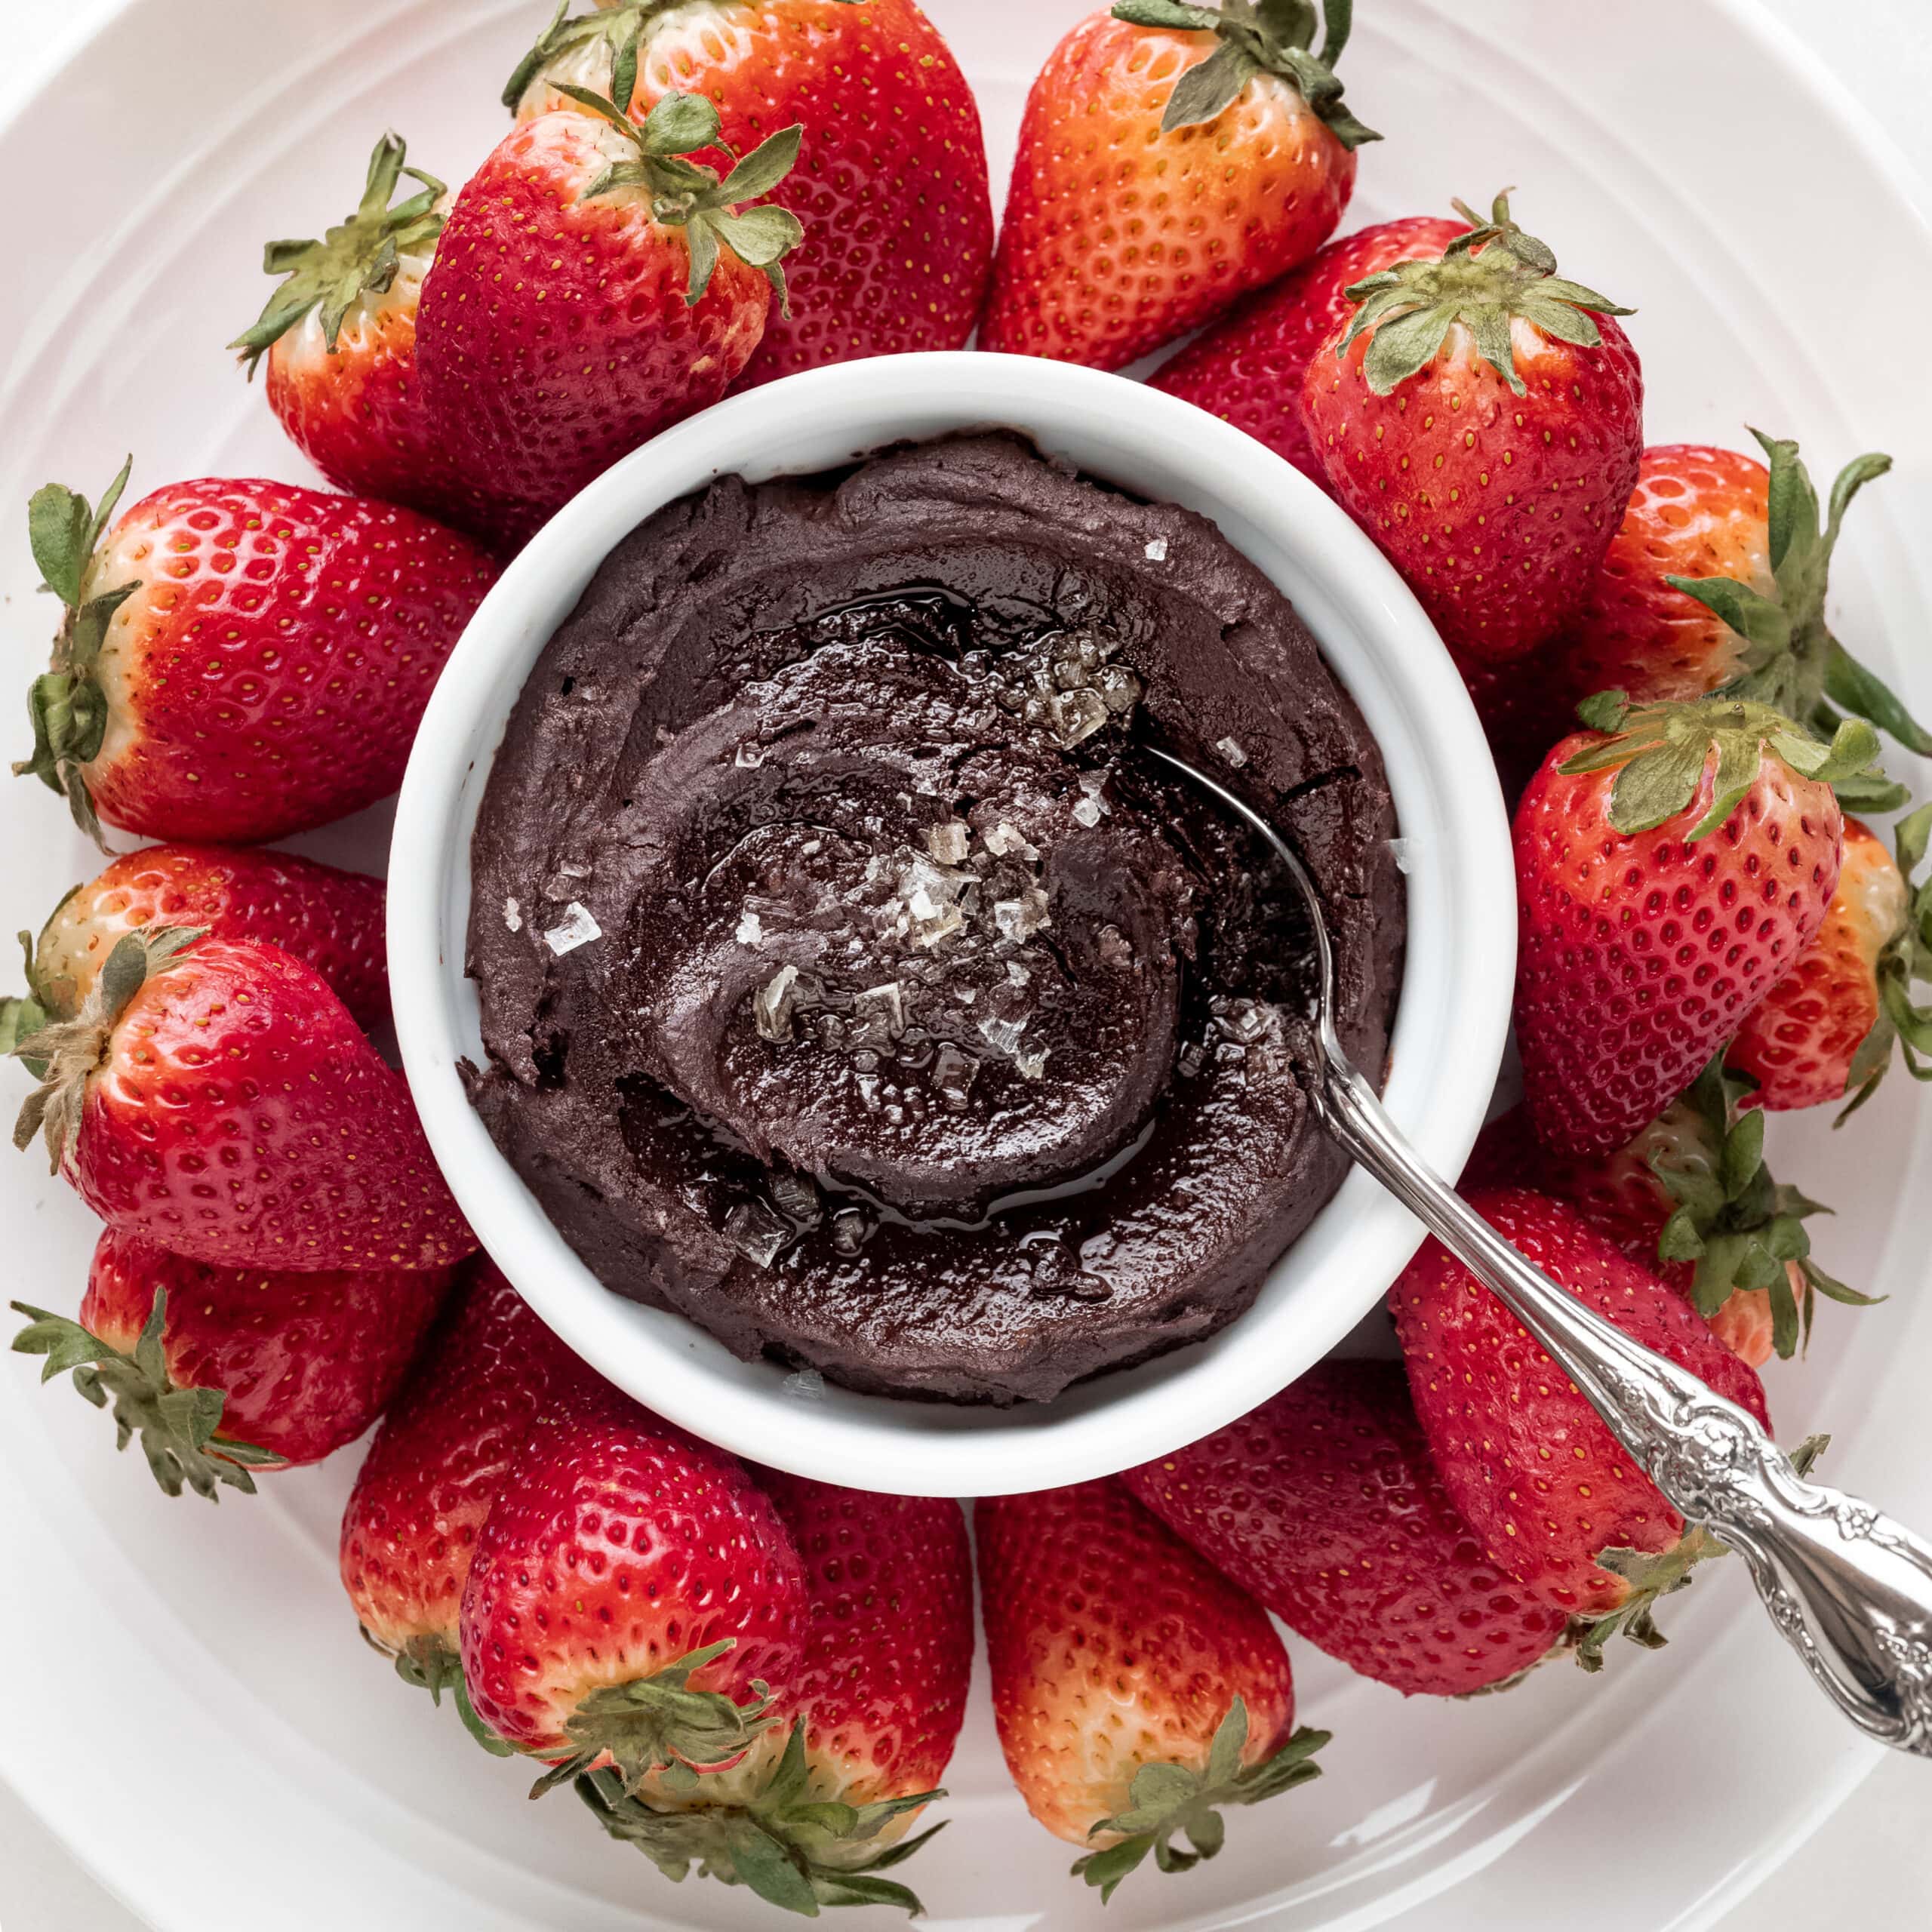 Dark chocolate hummus in a white bowl with sea salt on top, and a silver spoon on the side with red strawberries surrounding the bowl.